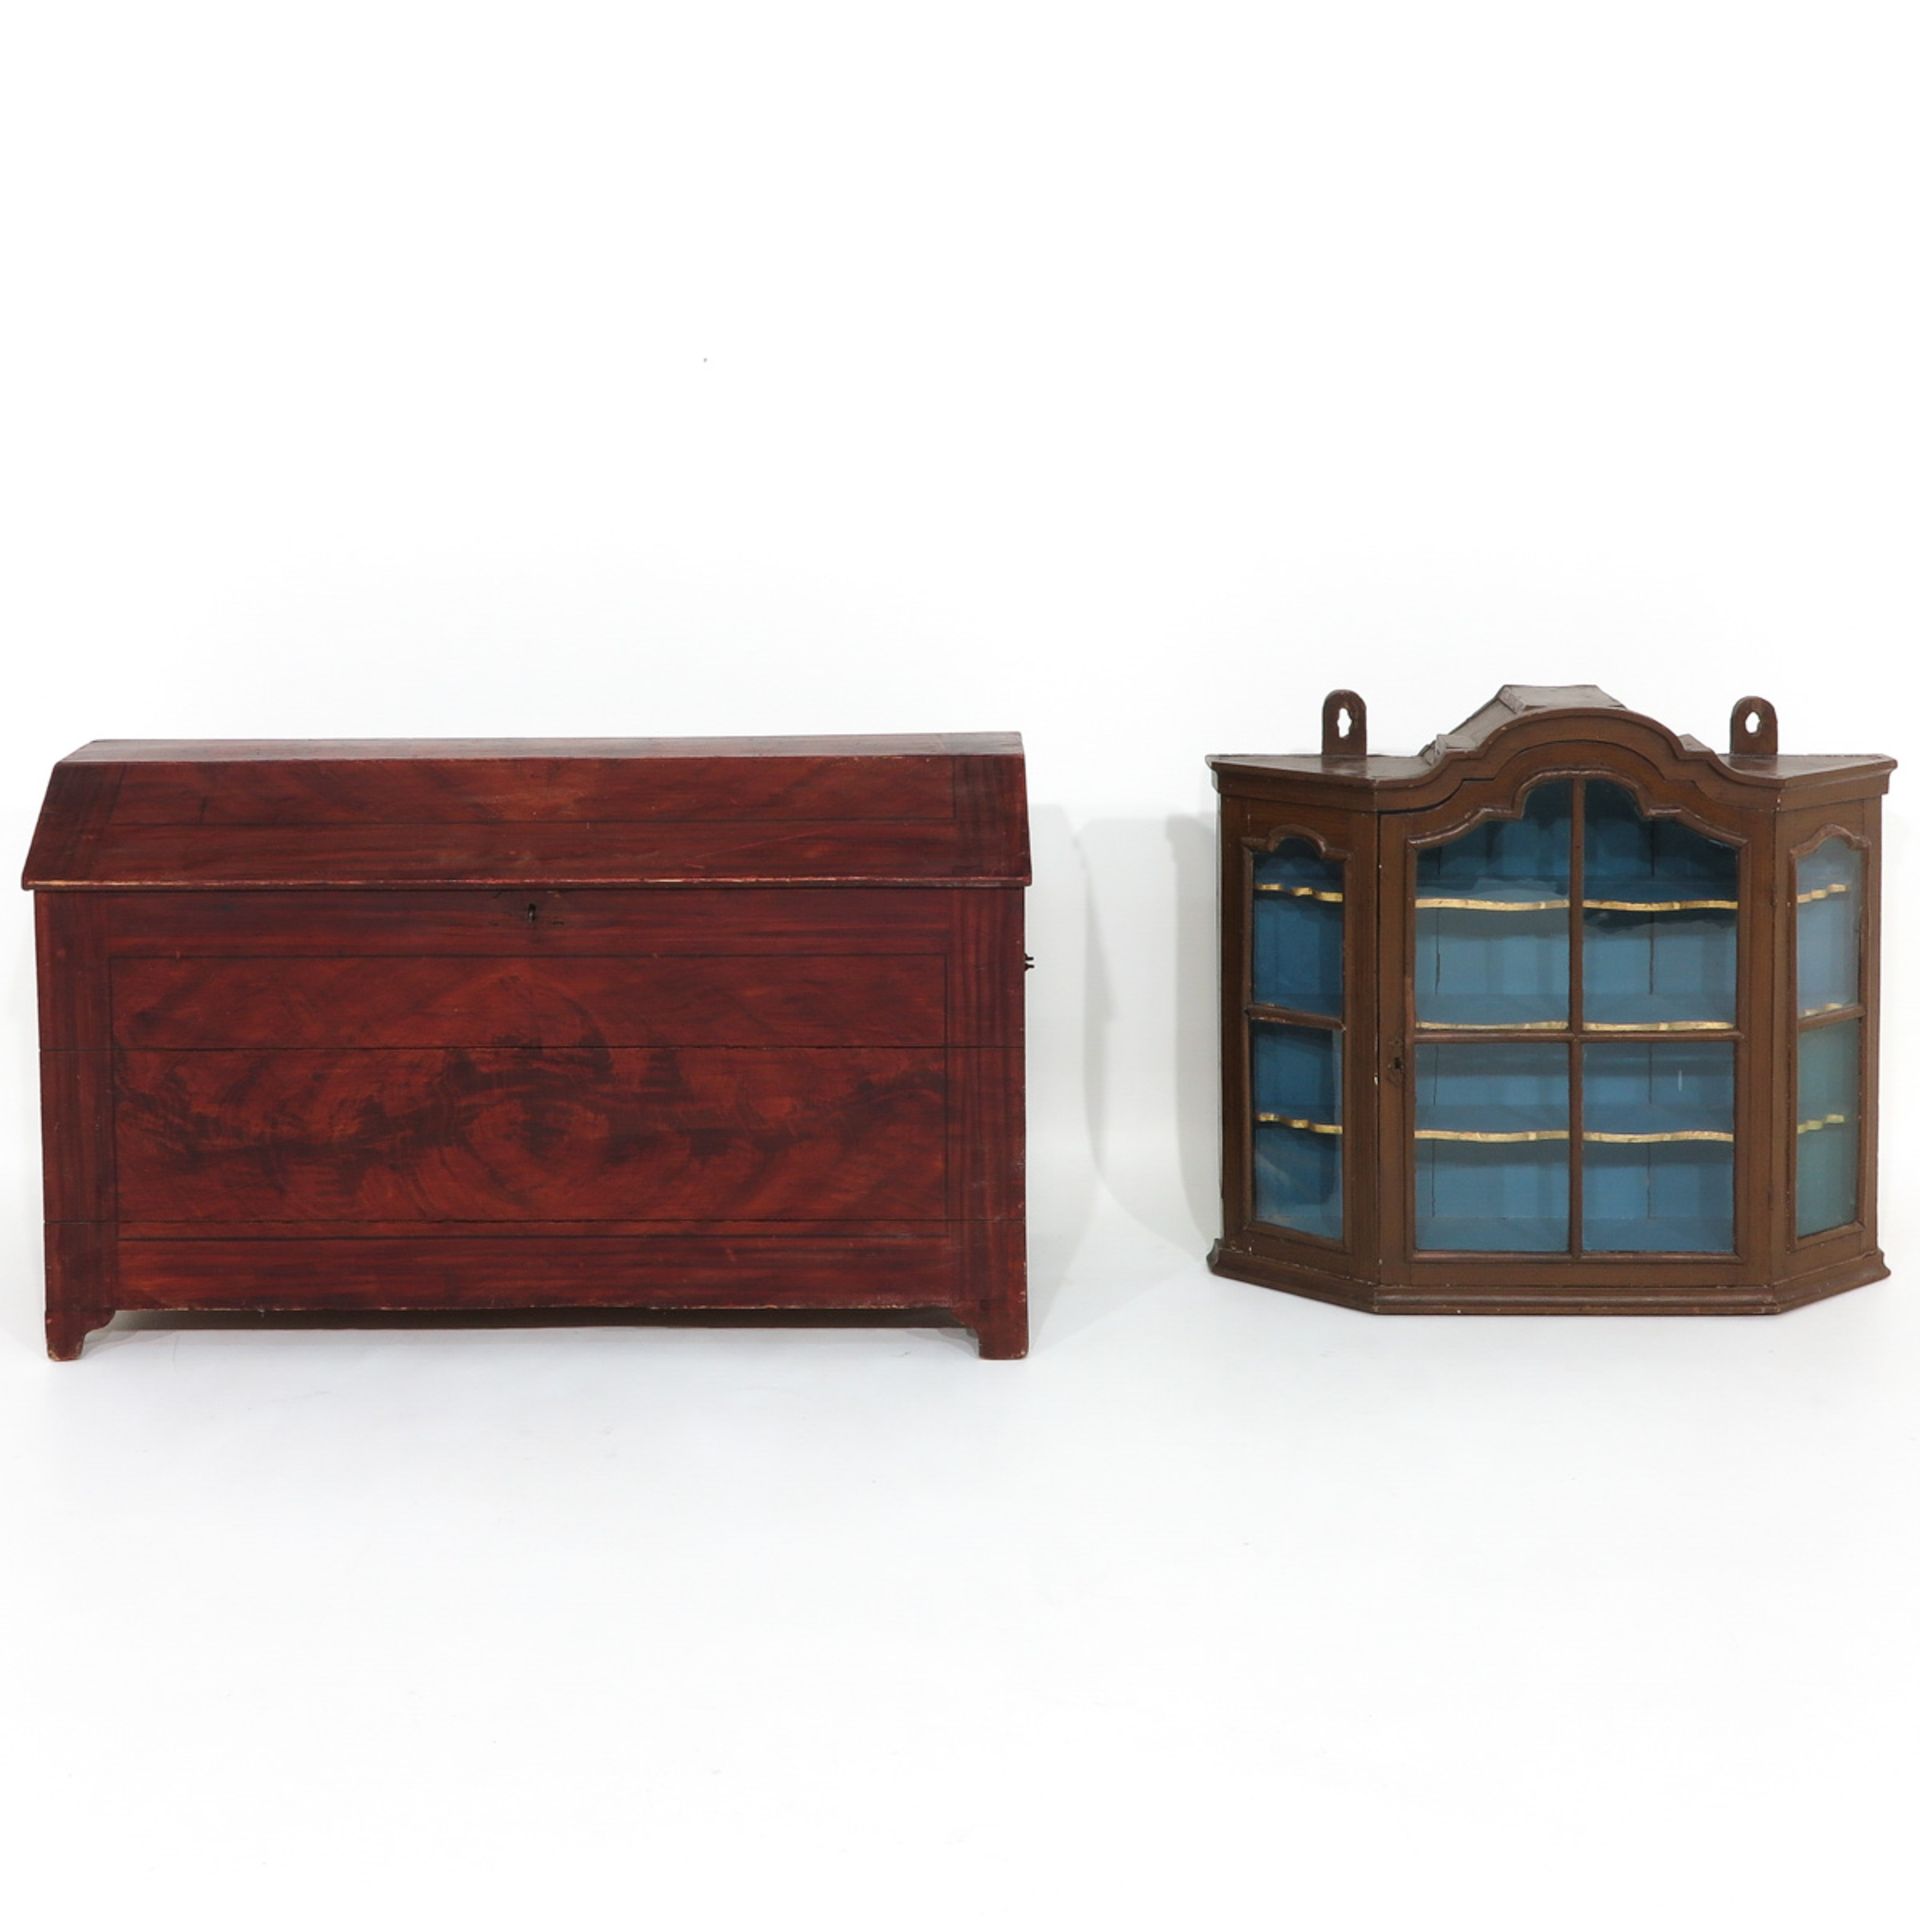 A Zeeuwse Cabinet and Antique Wall Vitrine